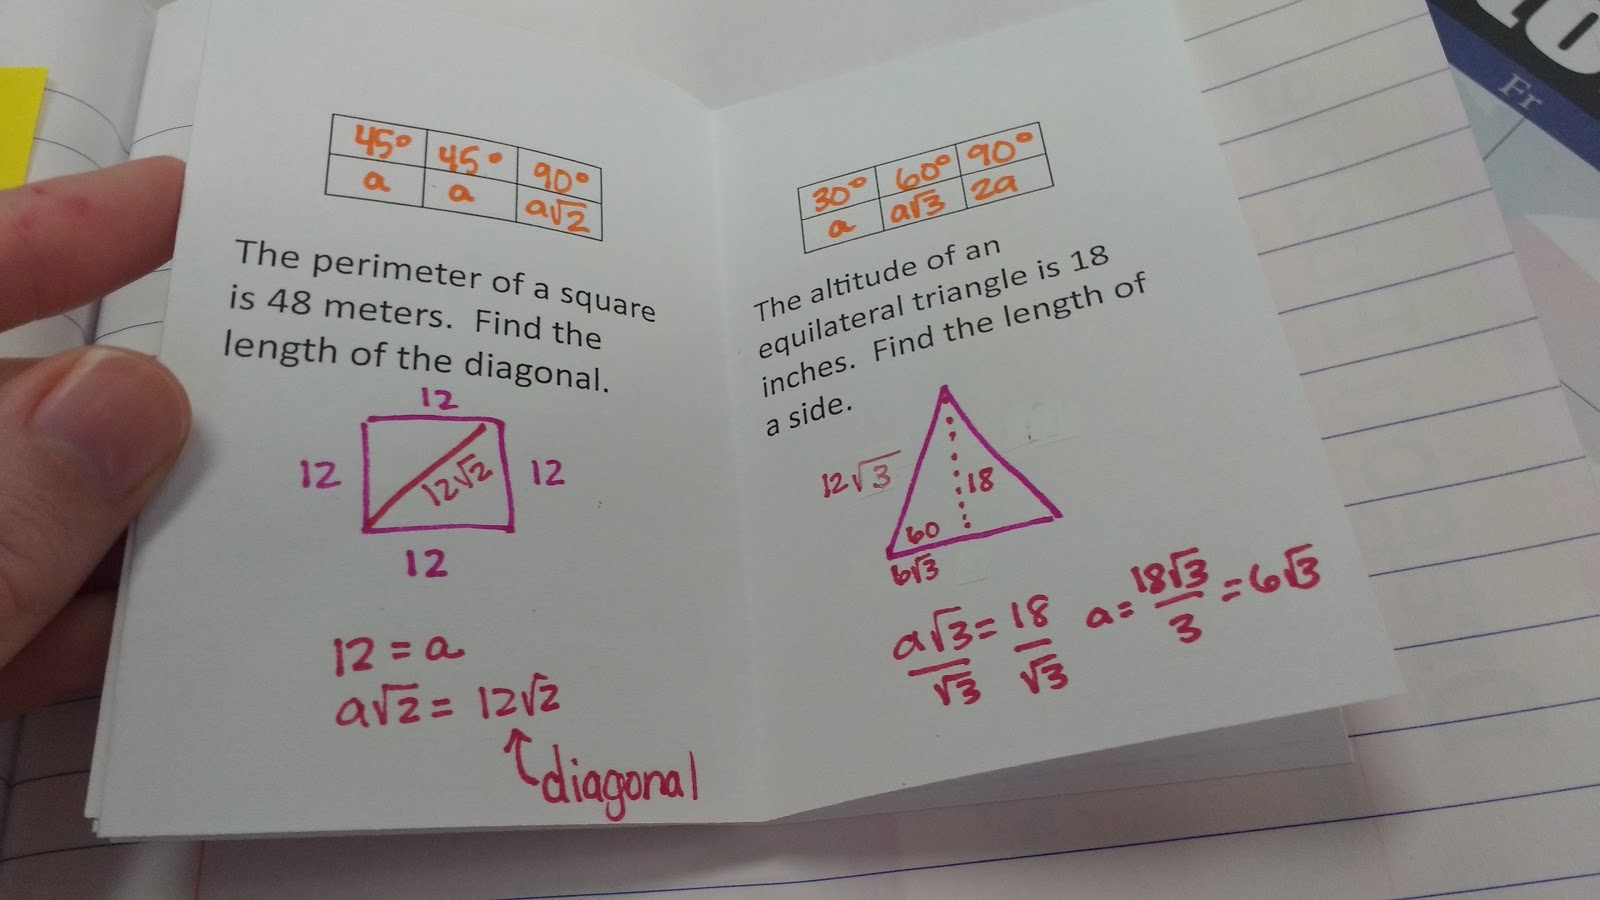 special right triangles practice book